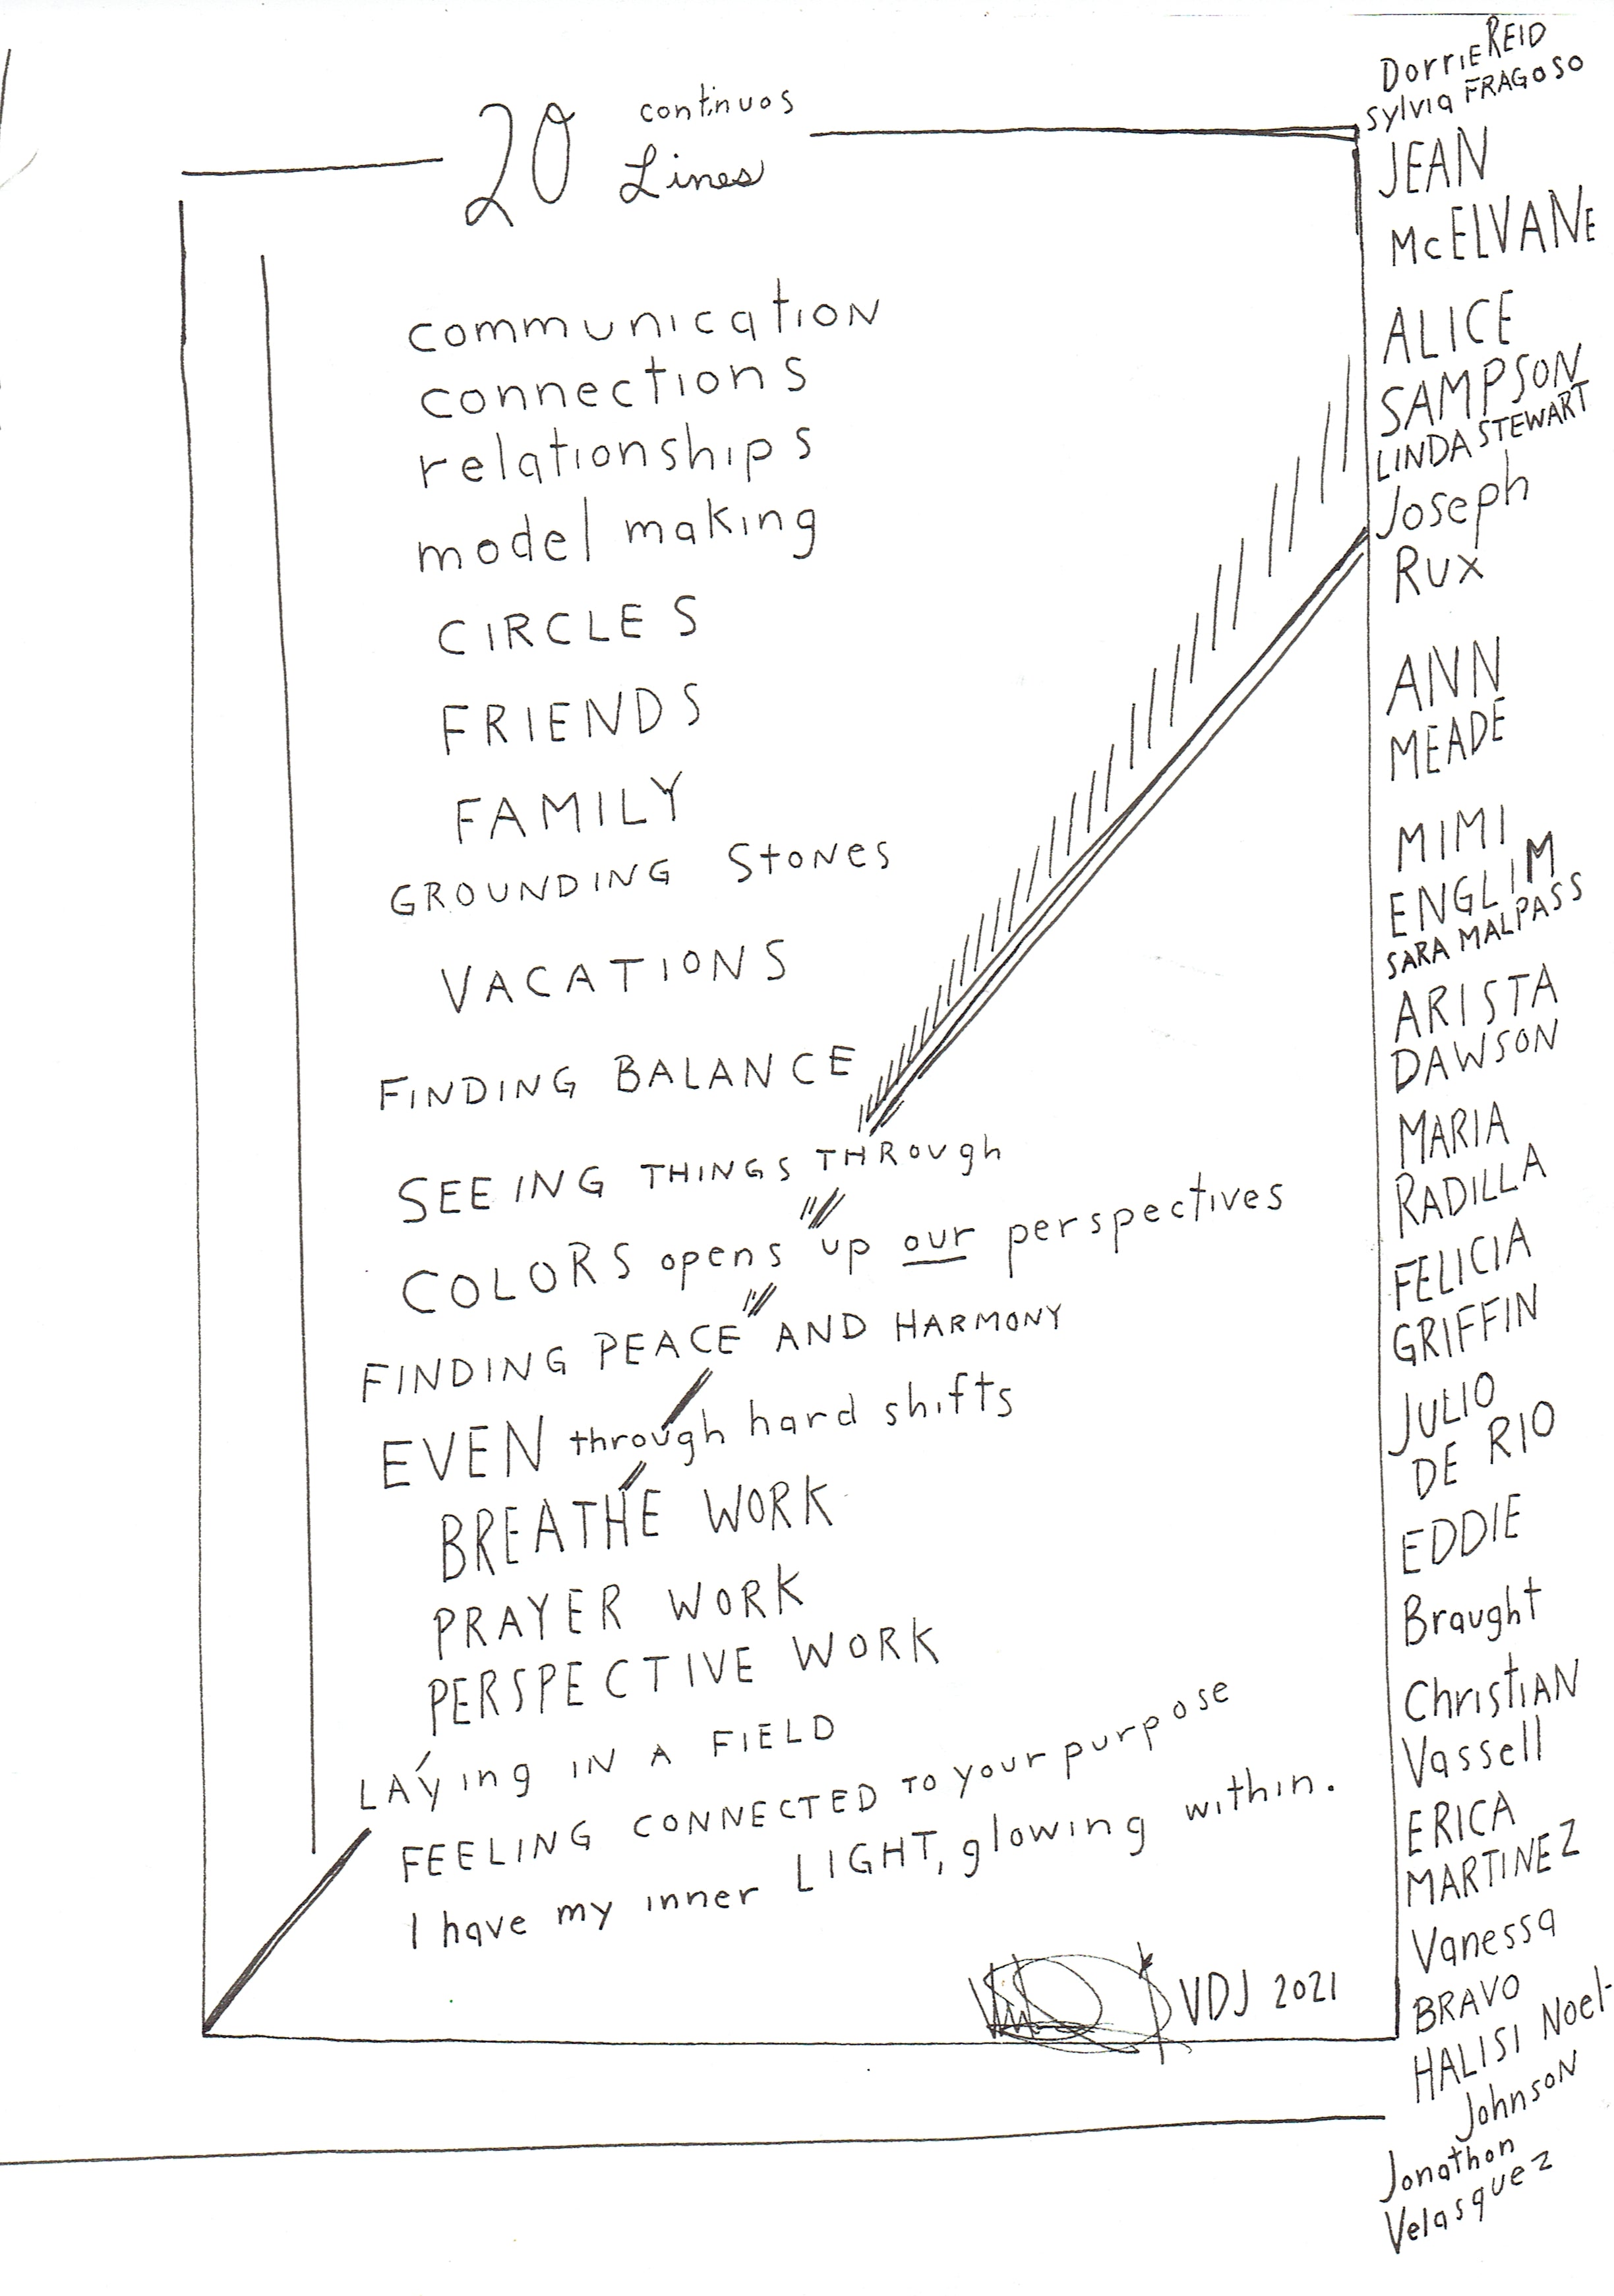 hand drawn text on a white rectangle. The text is typed below in the same order as it appears in this image. To the right of the listed terms is a list of the artists names included in the show, stacked vertically.